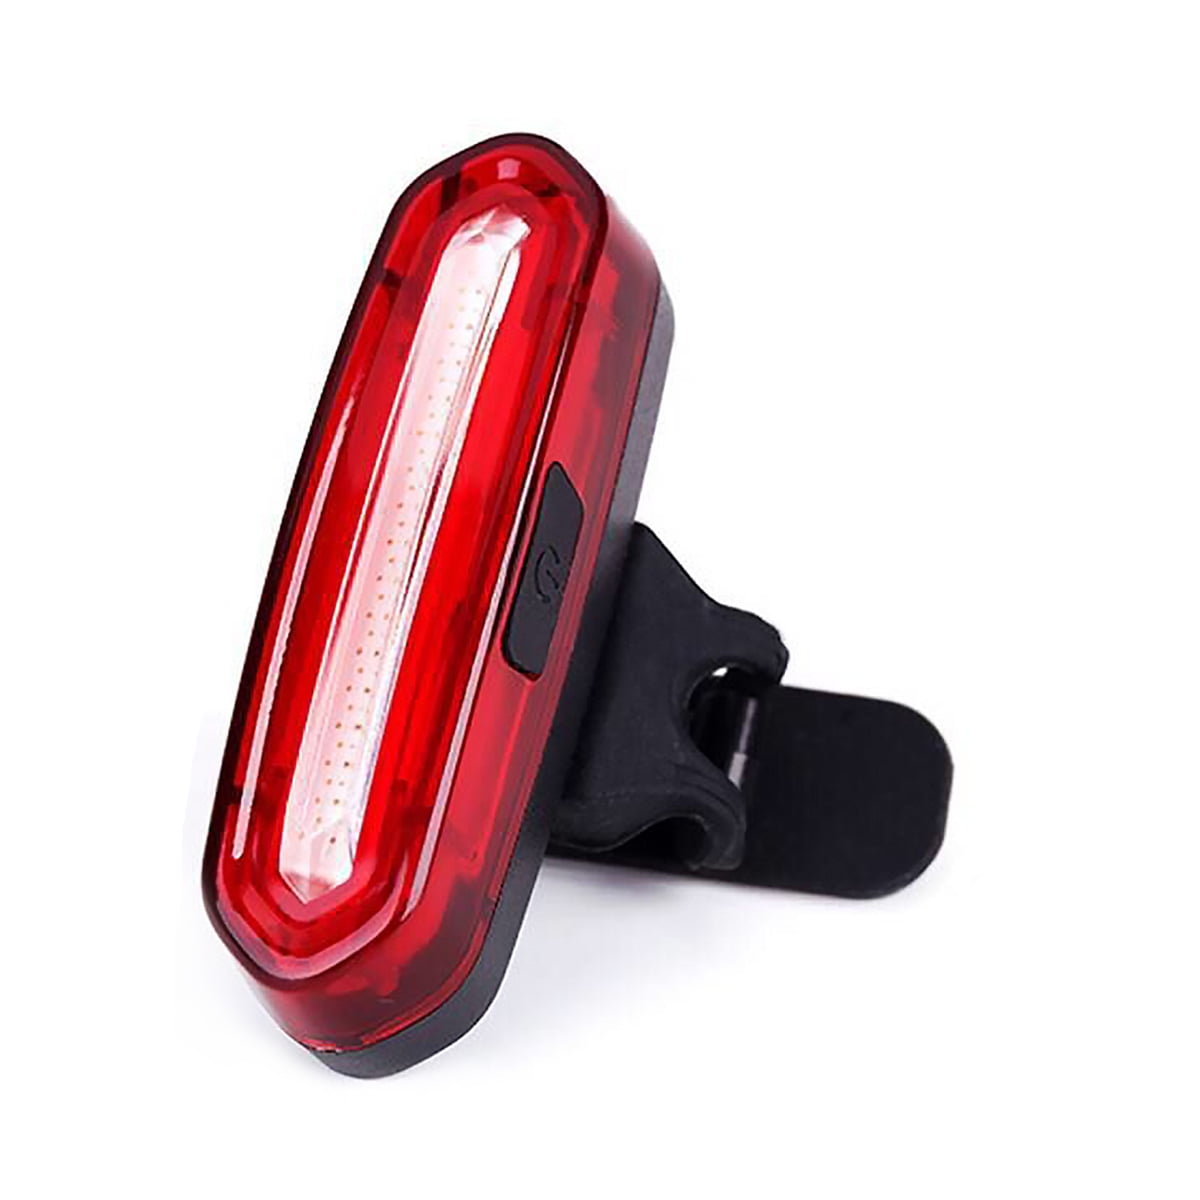 Details about   120 Lumens Bike Tail Light USB Rechargeable Powerful Bicycle Rear Light CHZ